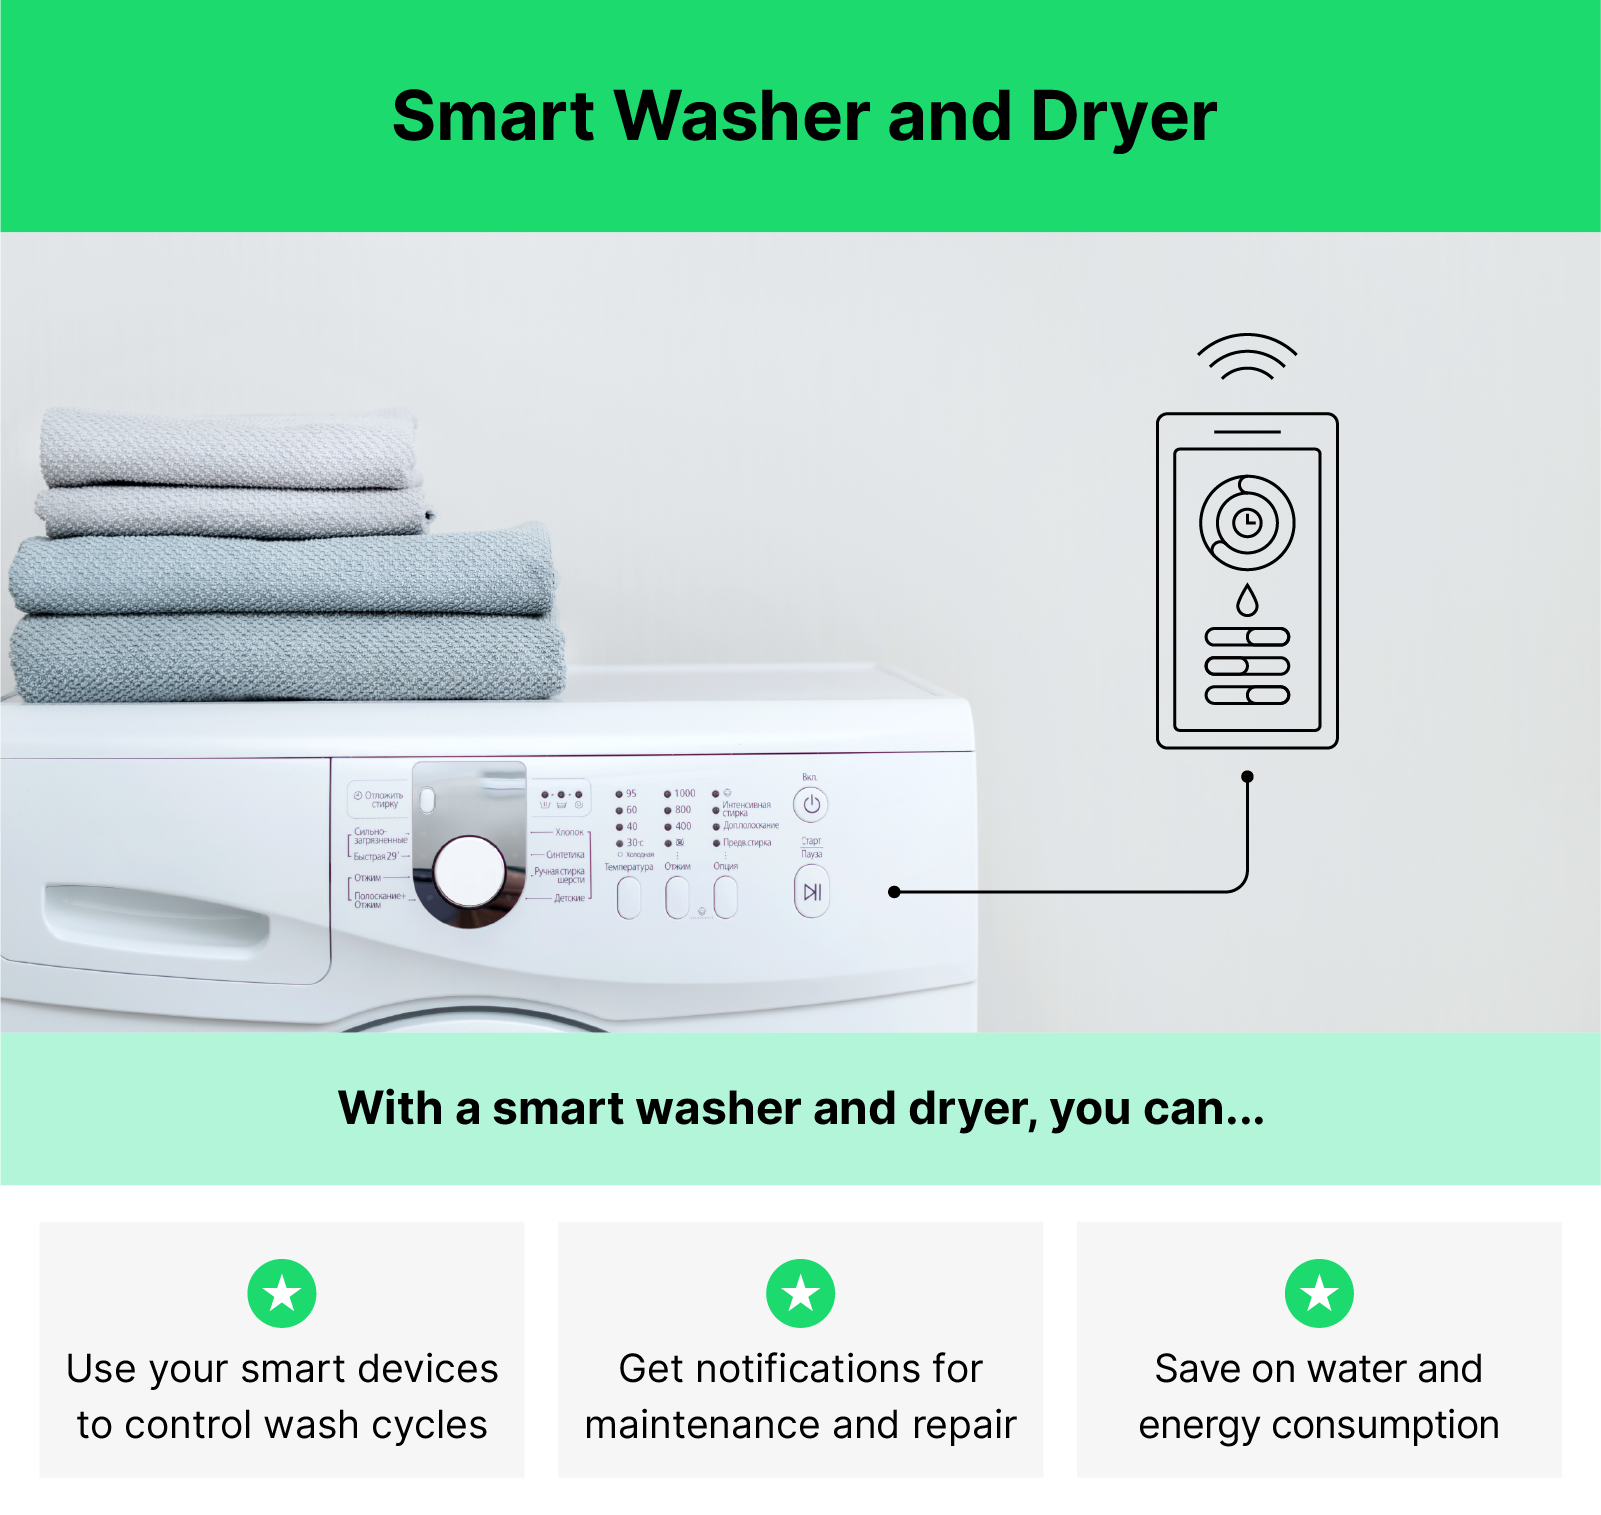 Image of a washing machine with illustrated smart tech elements with text below